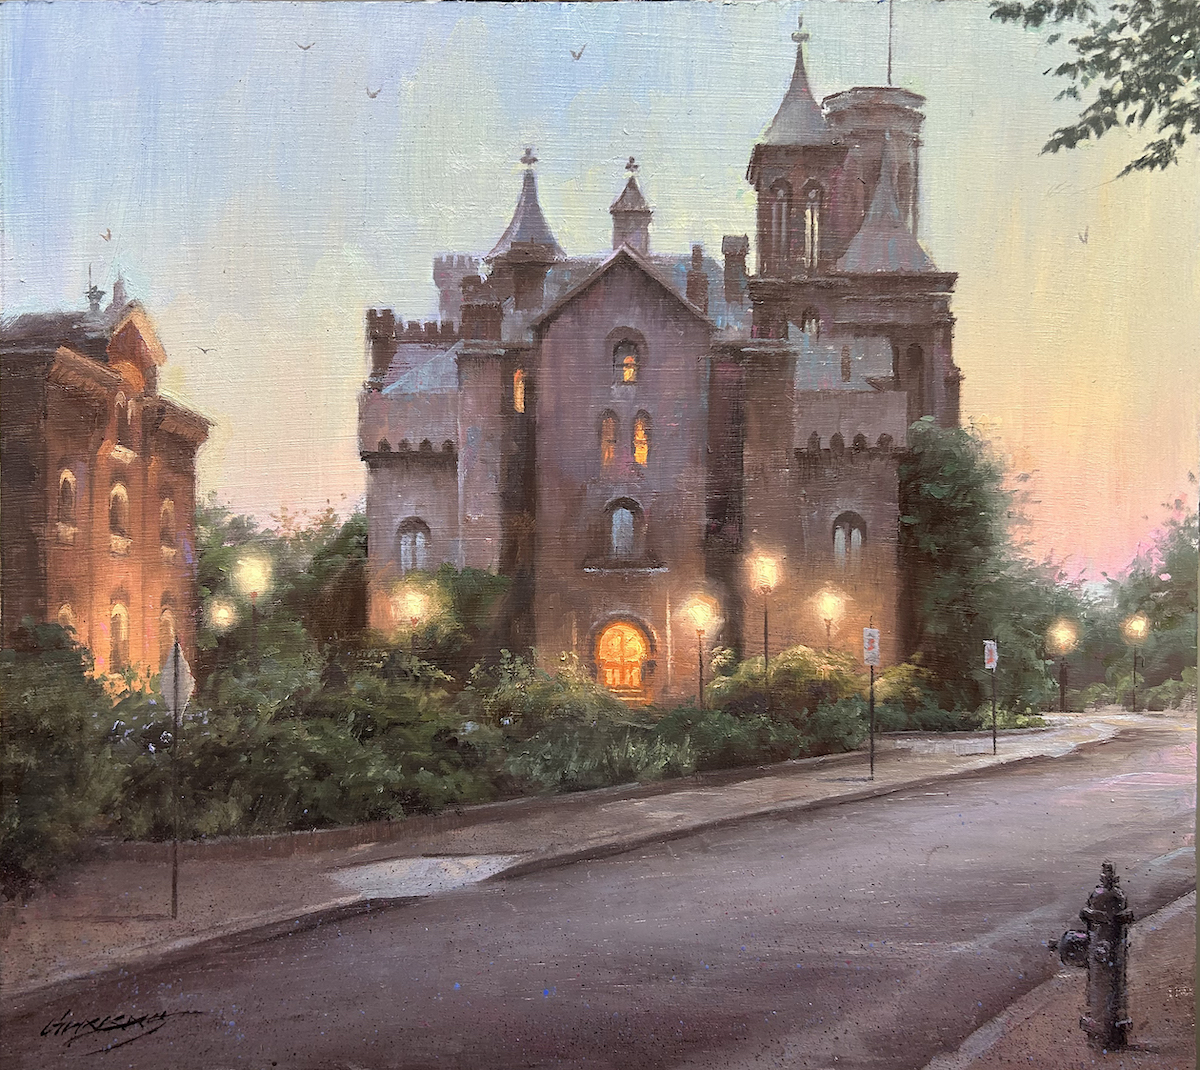 Realism landscape painting - Gavin Glakas, “The Smithsonian Castle,” Oil on panel, 13 x 16 in.